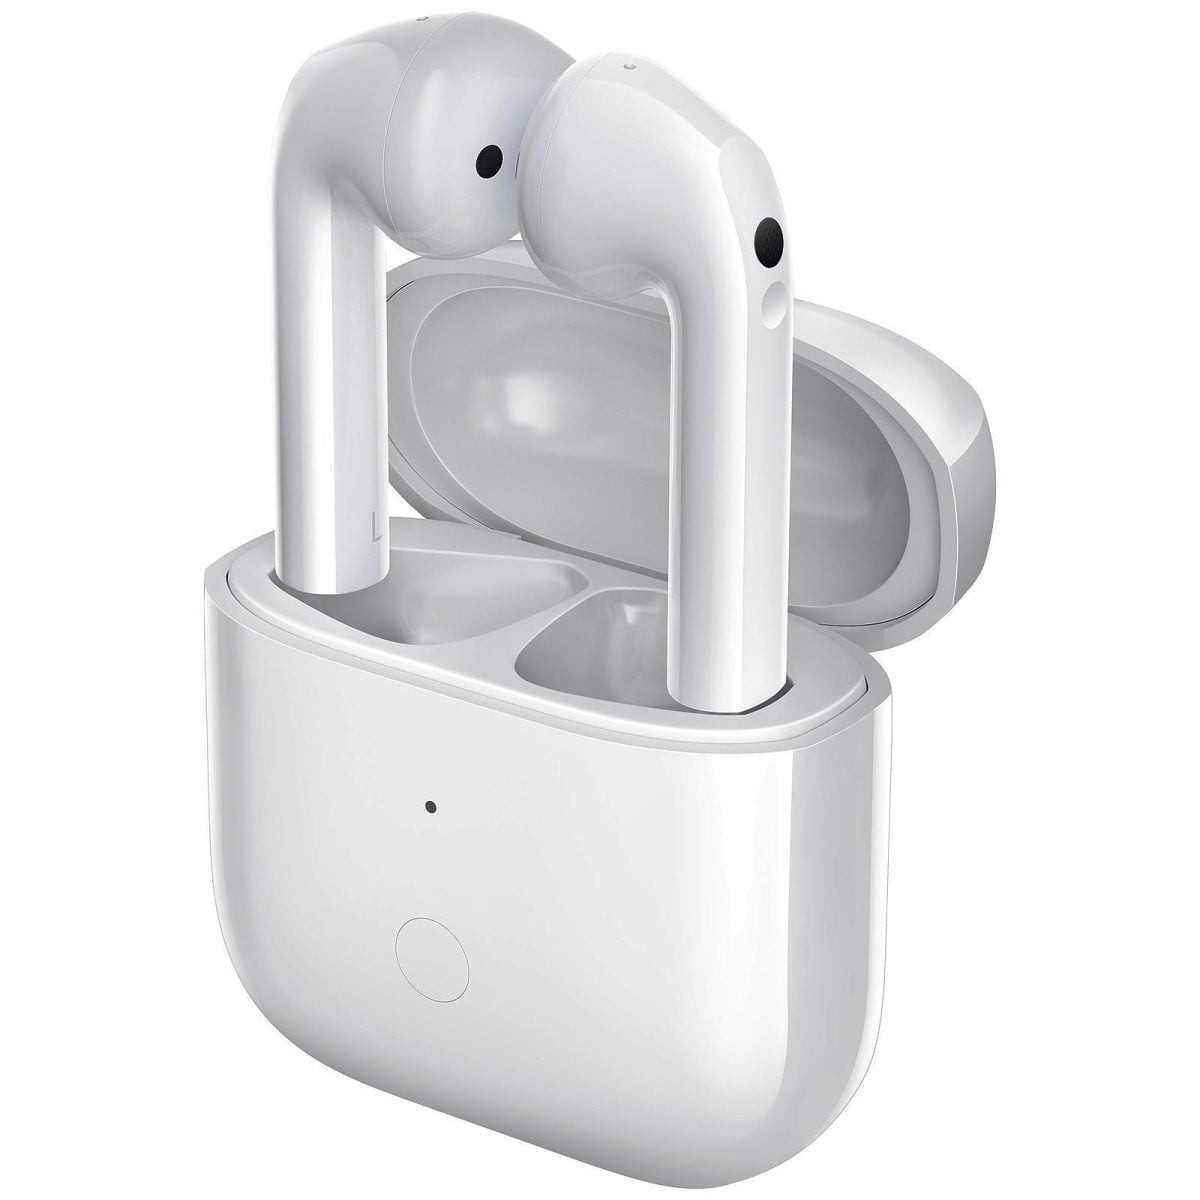 Ld0005916929 1 Redmi &Amp;Lt;H1&Amp;Gt;Redmi Buds 3 Bluetooth Earbuds - White&Amp;Lt;/H1&Amp;Gt; &Amp;Lt;Span Class=&Amp;Quot;Xm-Text F-Medium &Amp;Quot; Data-Key=&Amp;Quot;Slogan_1&Amp;Quot; Data-Type=&Amp;Quot;Text&Amp;Quot; Data-Id=&Amp;Quot;A934C620C7&Amp;Quot;&Amp;Gt;Dive Into The Beat Lightweight&Amp;Lt;/Span&Amp;Gt;&Amp;Lt;Span Class=&Amp;Quot;Xm-Text F-Light &Amp;Quot; Data-Key=&Amp;Quot;Ksp_1&Amp;Quot; Data-Type=&Amp;Quot;Text&Amp;Quot; Data-Id=&Amp;Quot;1Acf2B92C6&Amp;Quot;&Amp;Gt;, Semi In-Ear Earbuds | High-Resolution Sound Quality | Dual-Microphone Noise Cancellation For Calls | Extra-Long 20-Hour Battery Life. &Amp;Lt;Span Class=&Amp;Quot;Xm-Text F-Bold &Amp;Quot; Data-Key=&Amp;Quot;Ksp_2&Amp;Quot; Data-Type=&Amp;Quot;Text&Amp;Quot; Data-Id=&Amp;Quot;737550A742&Amp;Quot;&Amp;Gt;Lightweight, Semi In-Ear Design Each&Amp;Lt;/Span&Amp;Gt; Earbud Weighs Only 4.5G.&Amp;Lt;Span Class=&Amp;Quot;Xm-Text F-Bold &Amp;Quot; Data-Key=&Amp;Quot;Ksp_4&Amp;Quot; Data-Type=&Amp;Quot;Text&Amp;Quot; Data-Id=&Amp;Quot;1E3Aa7Ee6F&Amp;Quot;&Amp;Gt;Qualcomm® Qcc3040 Bluetooth® Chip Set &Amp;Lt;/Span&Amp;Gt;Low Power Consumption, Long Battery Life.&Amp;Lt;Span Class=&Amp;Quot;Xm-Text F-Bold &Amp;Quot; Data-Key=&Amp;Quot;Ksp_6&Amp;Quot; Data-Type=&Amp;Quot;Text&Amp;Quot; Data-Id=&Amp;Quot;Cb7Bb07971&Amp;Quot;&Amp;Gt;12Mm Dynamic Driver &Amp;Lt;/Span&Amp;Gt;High-Resolution Sound Quality, For More Natural Detail.&Amp;Lt;Span Class=&Amp;Quot;Xm-Text F-Bold &Amp;Quot; Data-Key=&Amp;Quot;Ksp_8&Amp;Quot; Data-Type=&Amp;Quot;Text&Amp;Quot; Data-Id=&Amp;Quot;26B1Fc16E4&Amp;Quot;&Amp;Gt;Qualcomm® Cvc™ Echo Cancelling And Noise Suppression Technology &Amp;Lt;/Span&Amp;Gt;Crystal Clear Voice Calls&Amp;Lt;/Span&Amp;Gt; Redmi Redmi Buds 3 Bluetooth Earbuds - White